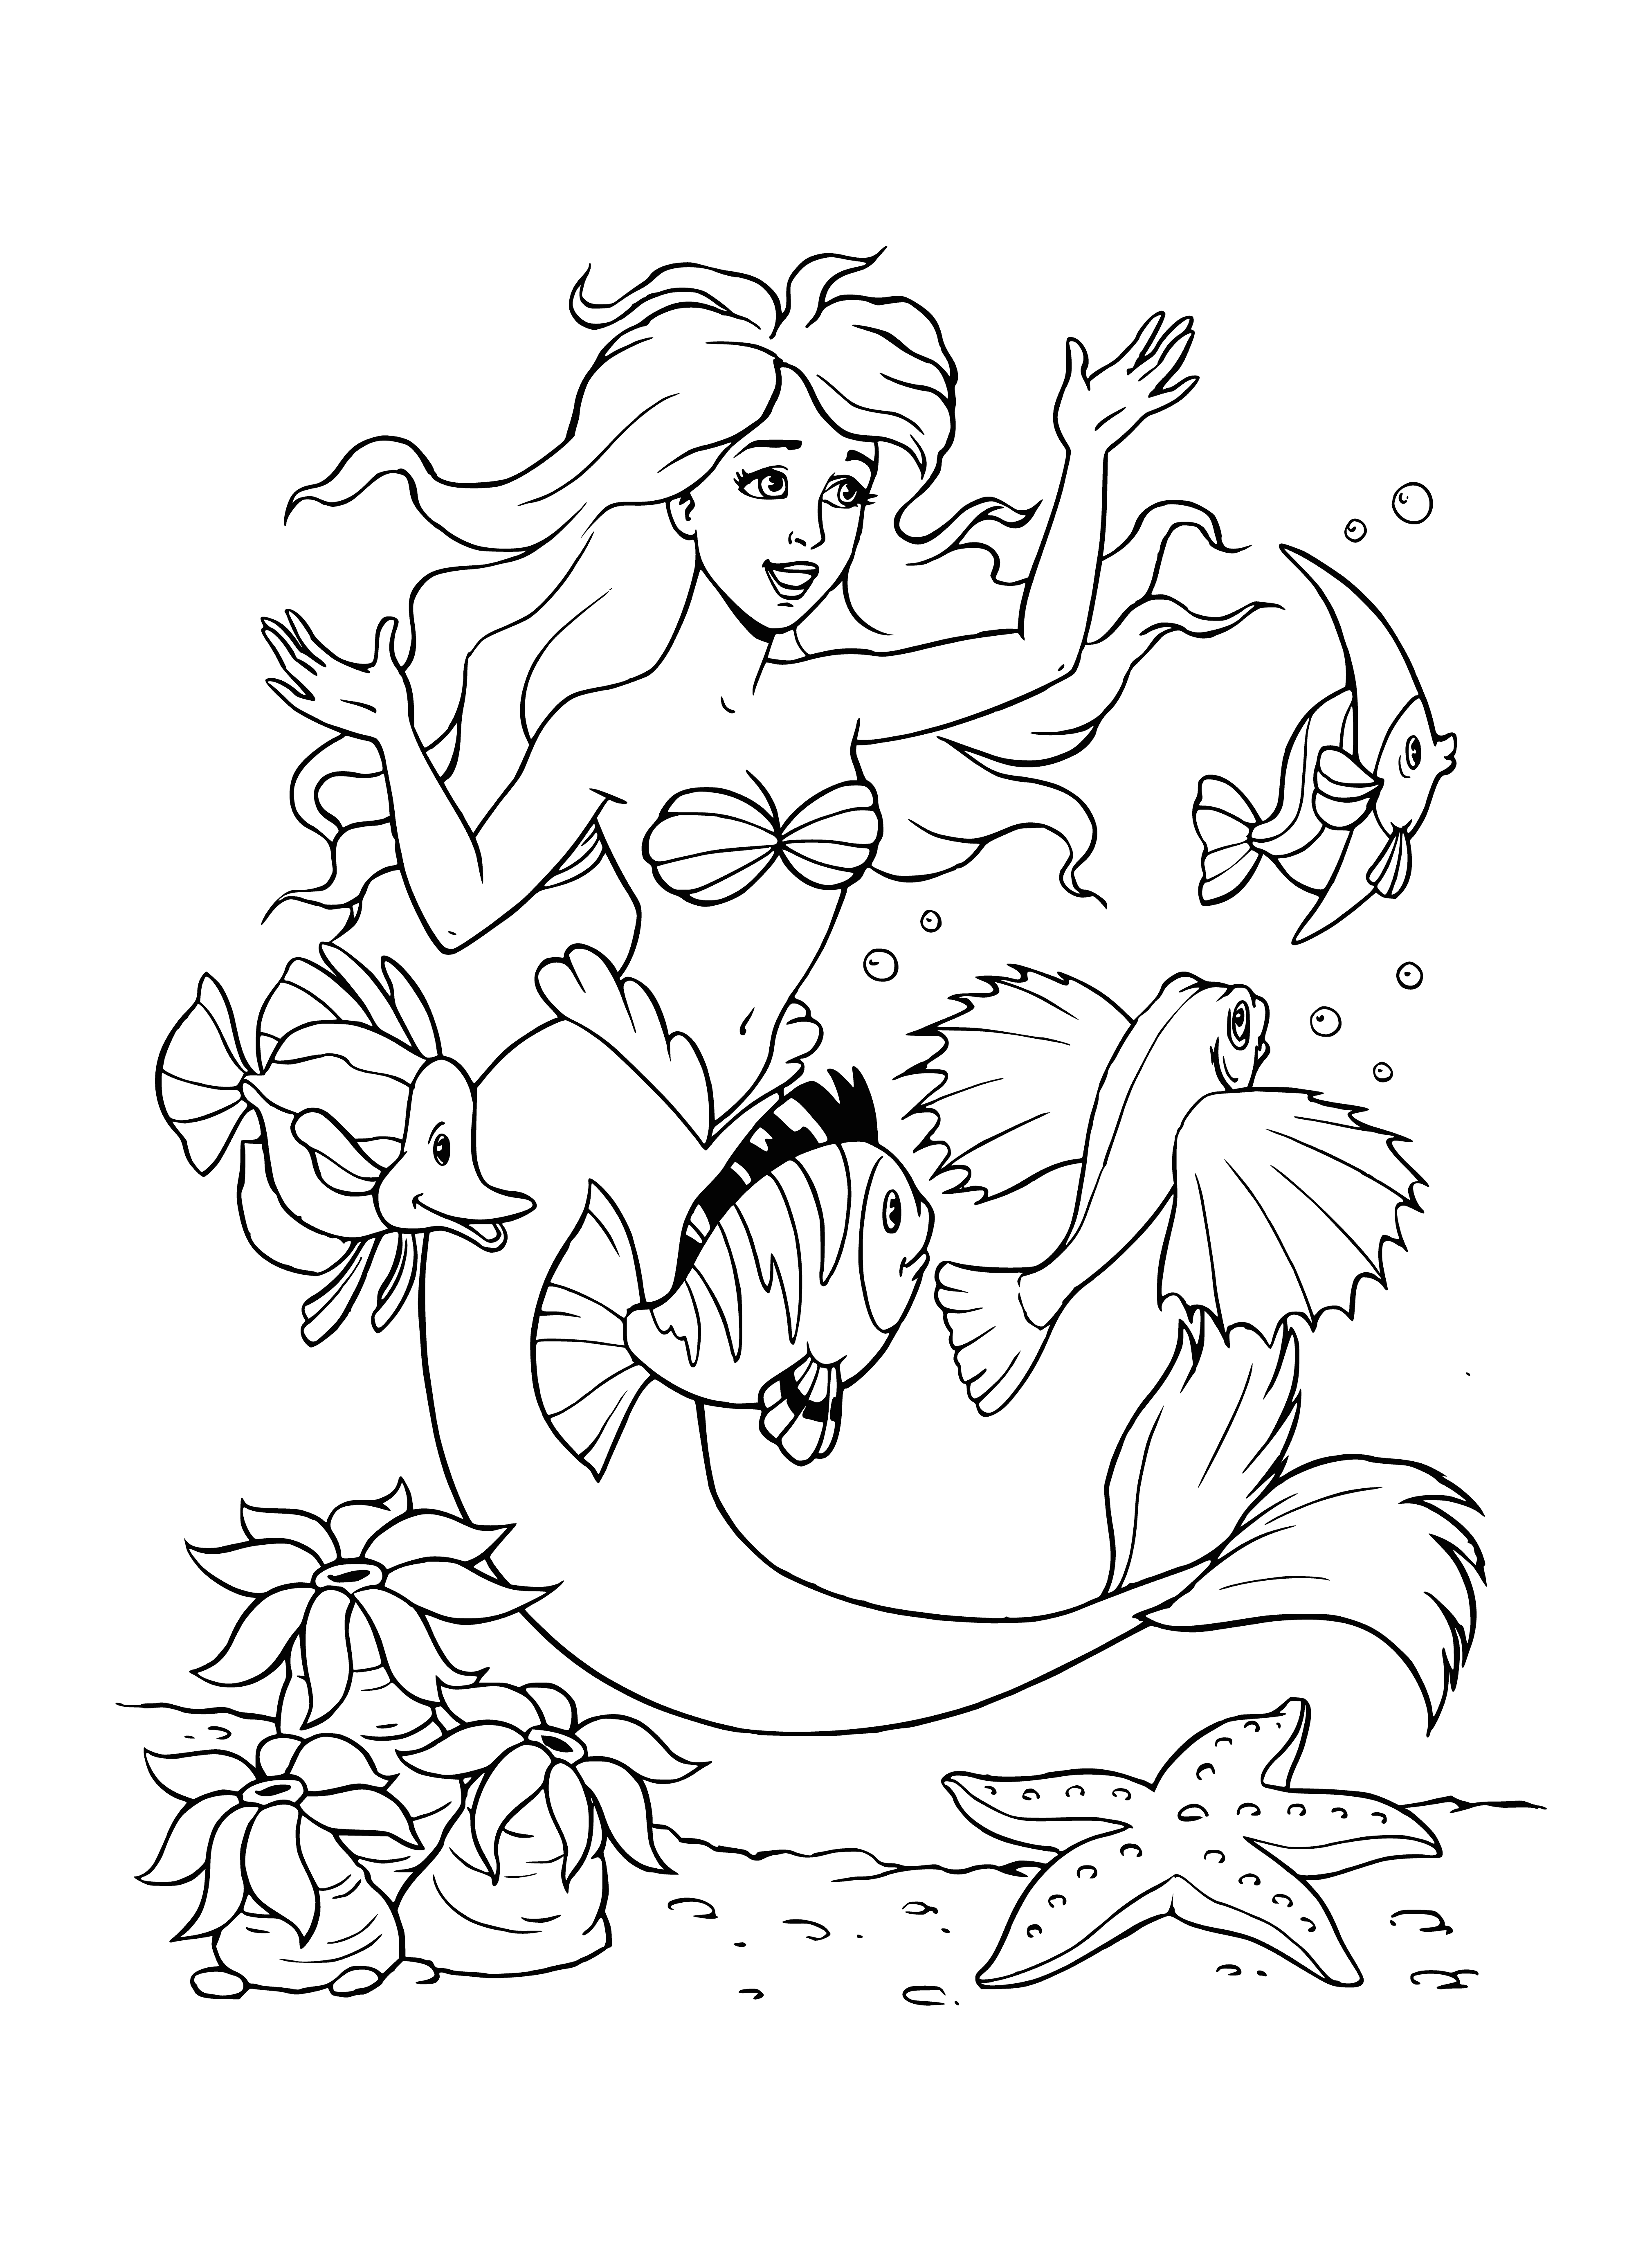 Under the water coloring page